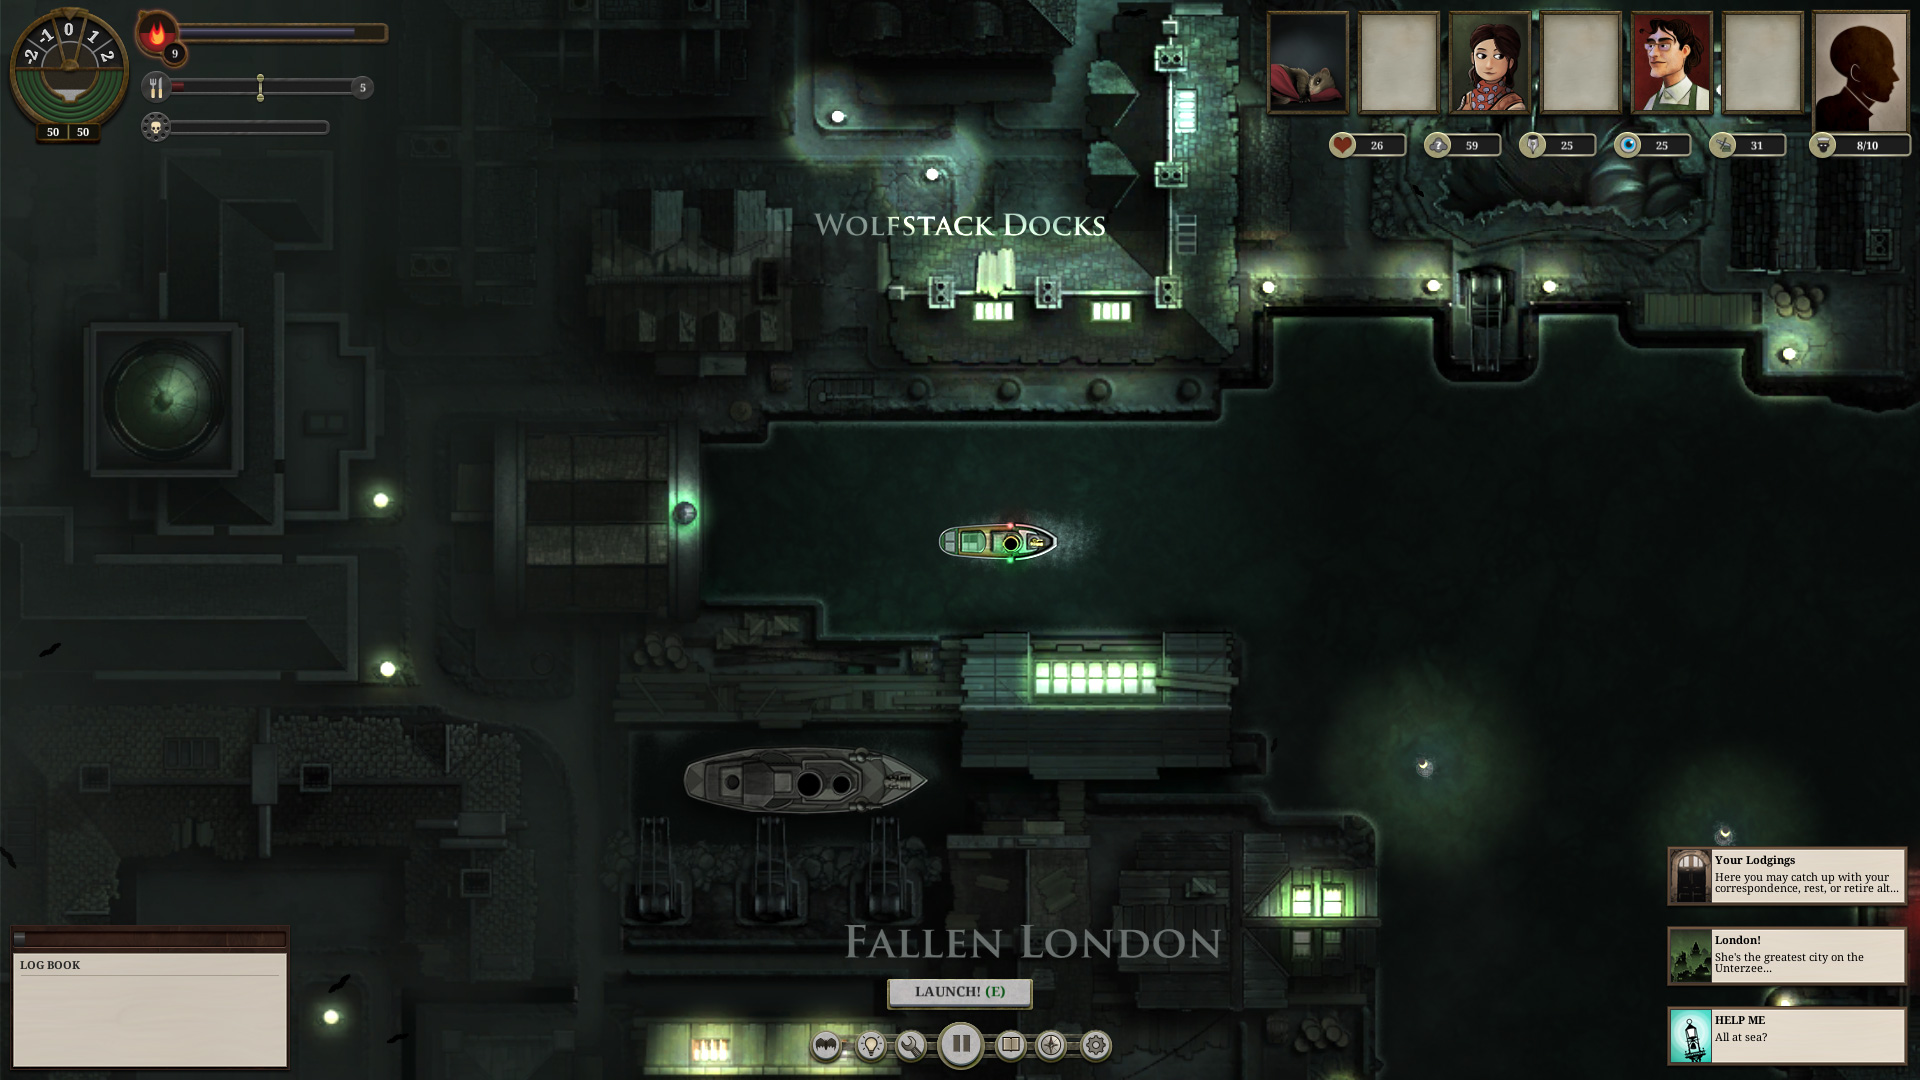 download the new version for ios Sunless Sea